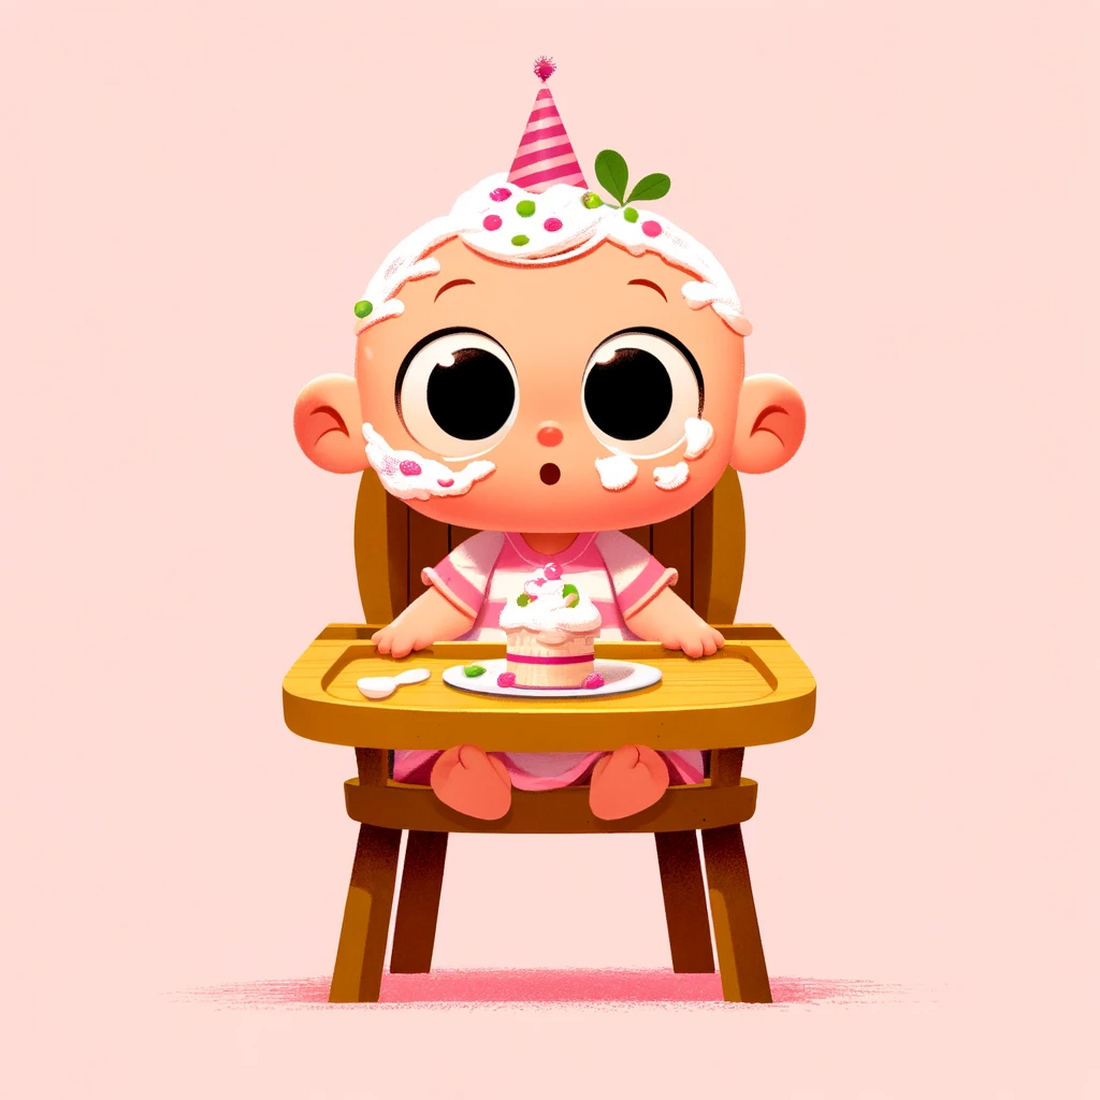 AI art of a baby, sitting in a high chair, what looks to be wearing a birthday hat and covered in birthday cake, in a cartoon st